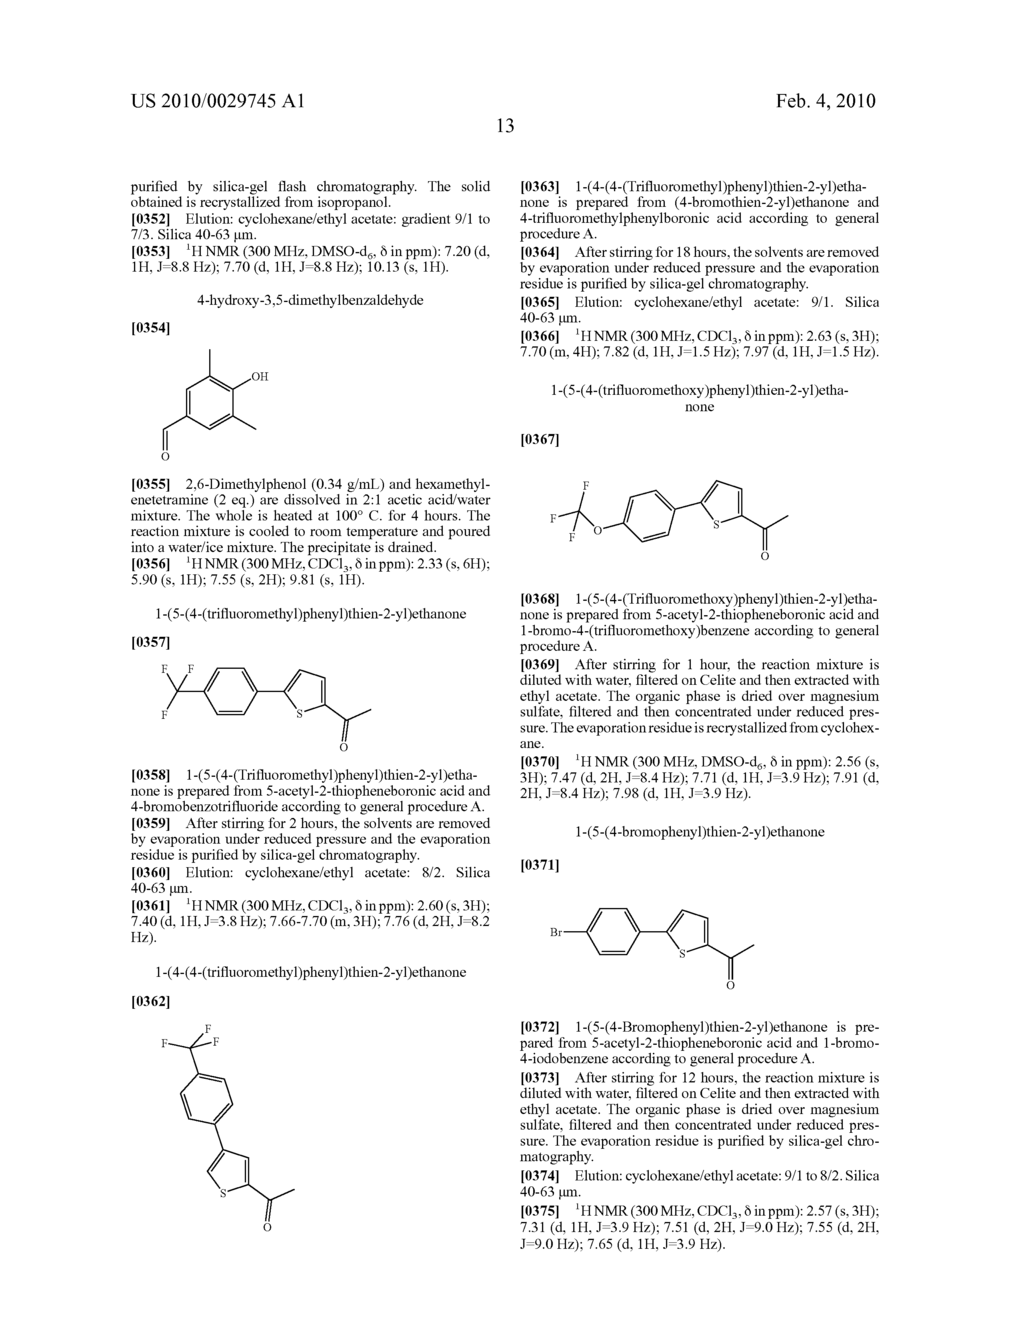 DERIVATIVES OF SUBSTITUTED 3-PHENYL-1-(PHENYLTHIENYL)PROPAN-1-ONES AND OF 3-PHENYL-1-(PHENYLFURANYL) PROPAN-1-ONES, PREPARATION AND USE - diagram, schematic, and image 26